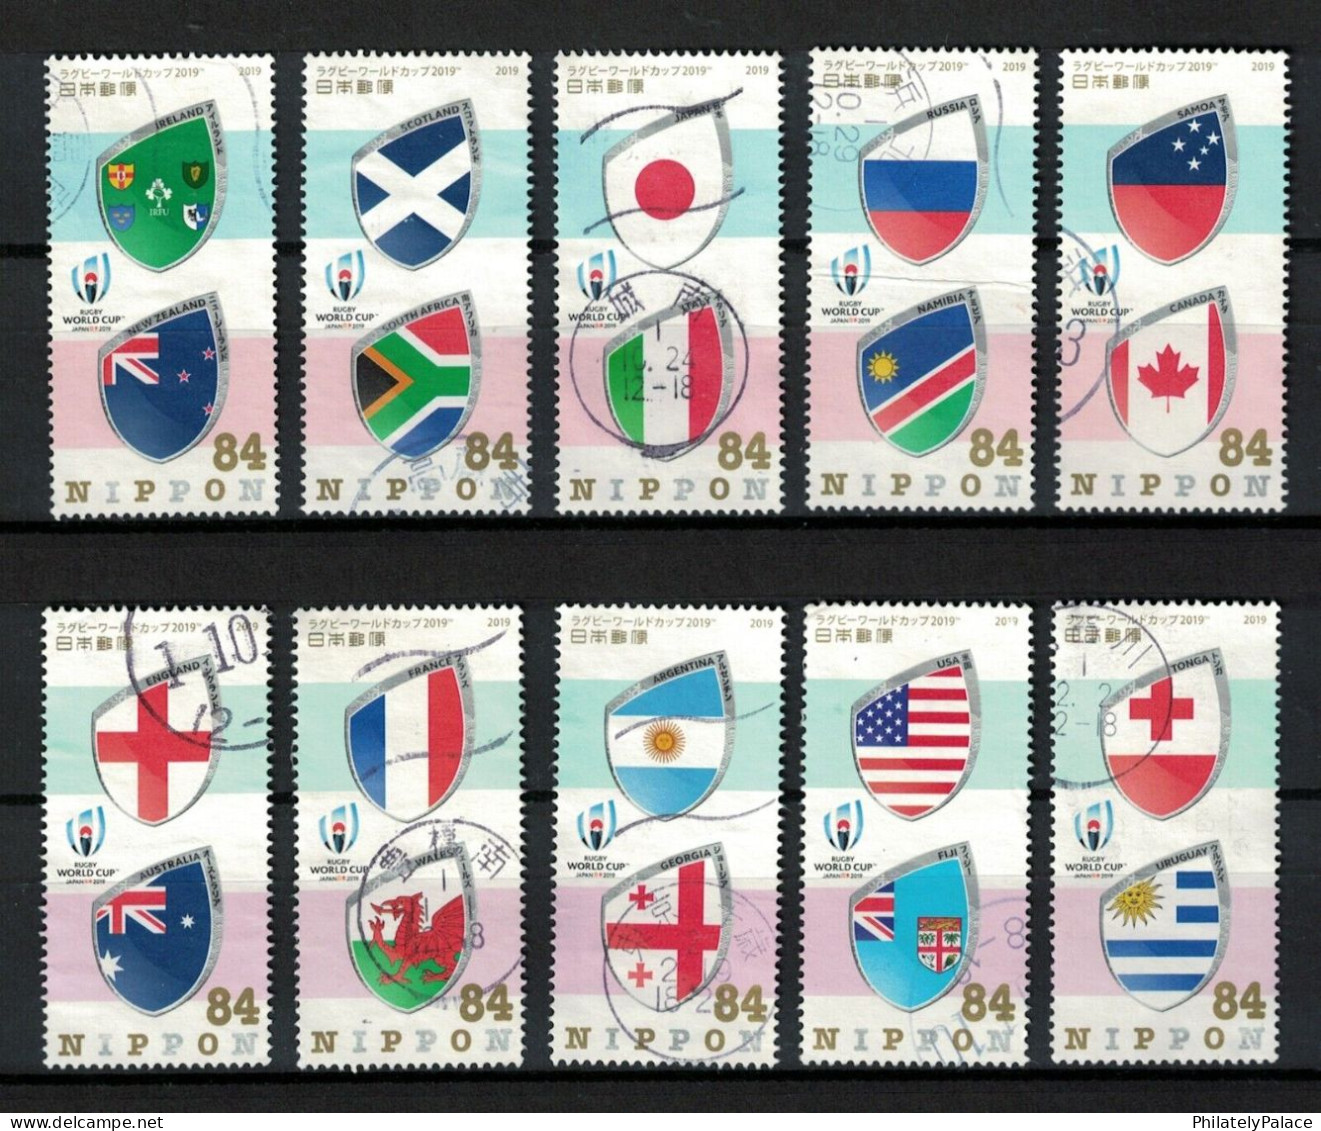 JAPAN 2019 RUGBY WORLD CUP,IRELAND,NEW ZEALAND,SOUTH AFRICA,SCOTLAND,ITALY,RUSSIA,NAMBIA,CANADA,SAMOA,10V Used SET - Gebruikt